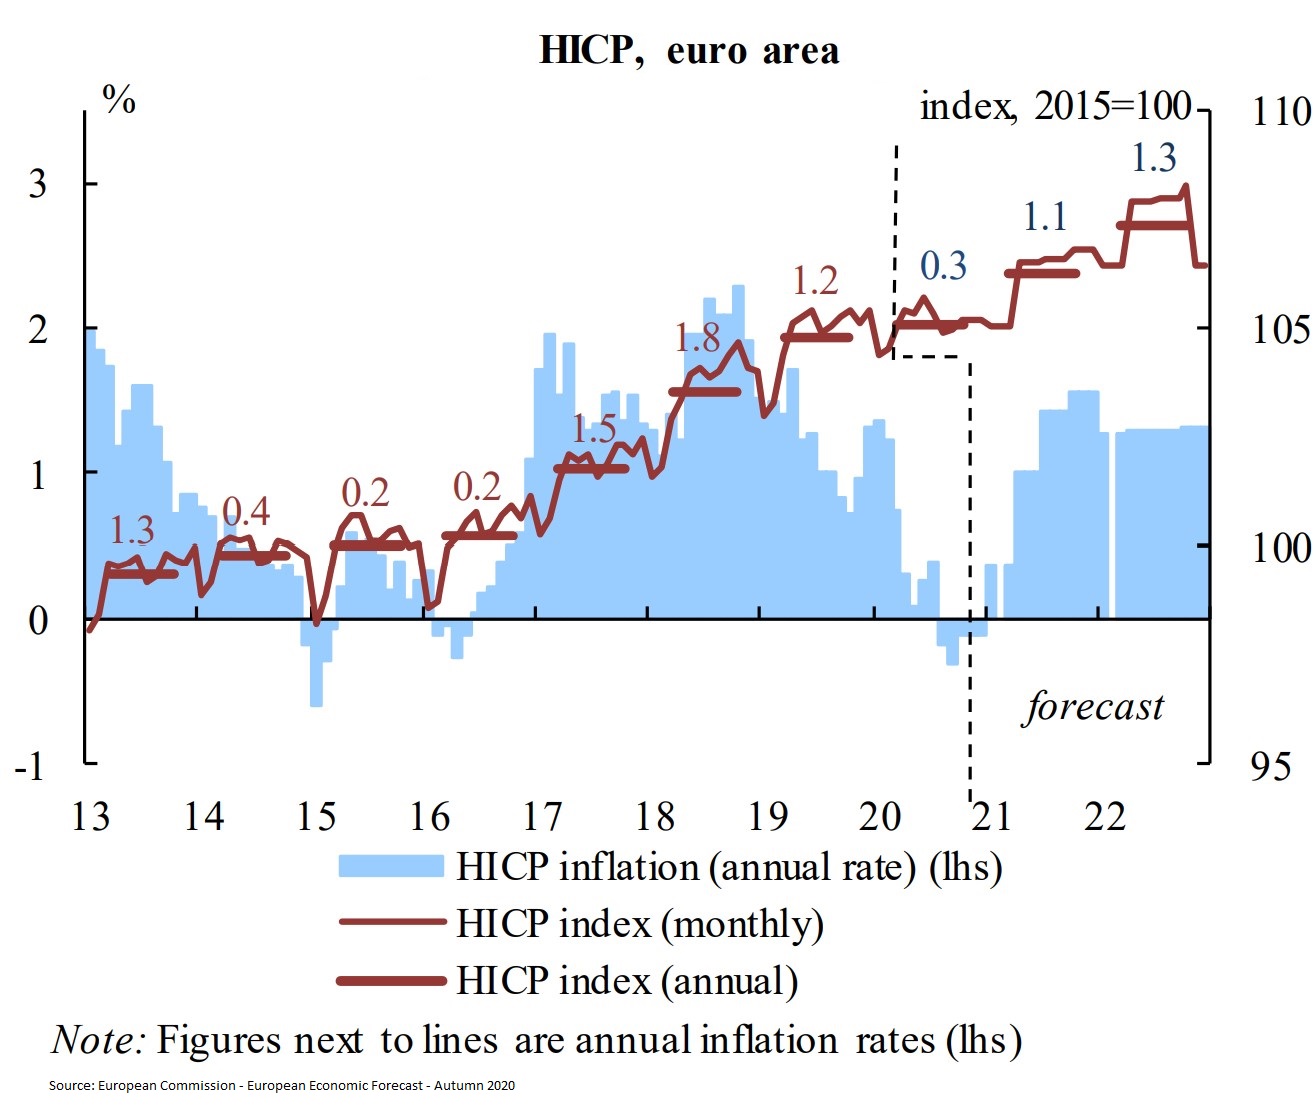 More Easing From The ECB Despite COVID-19 Positive News